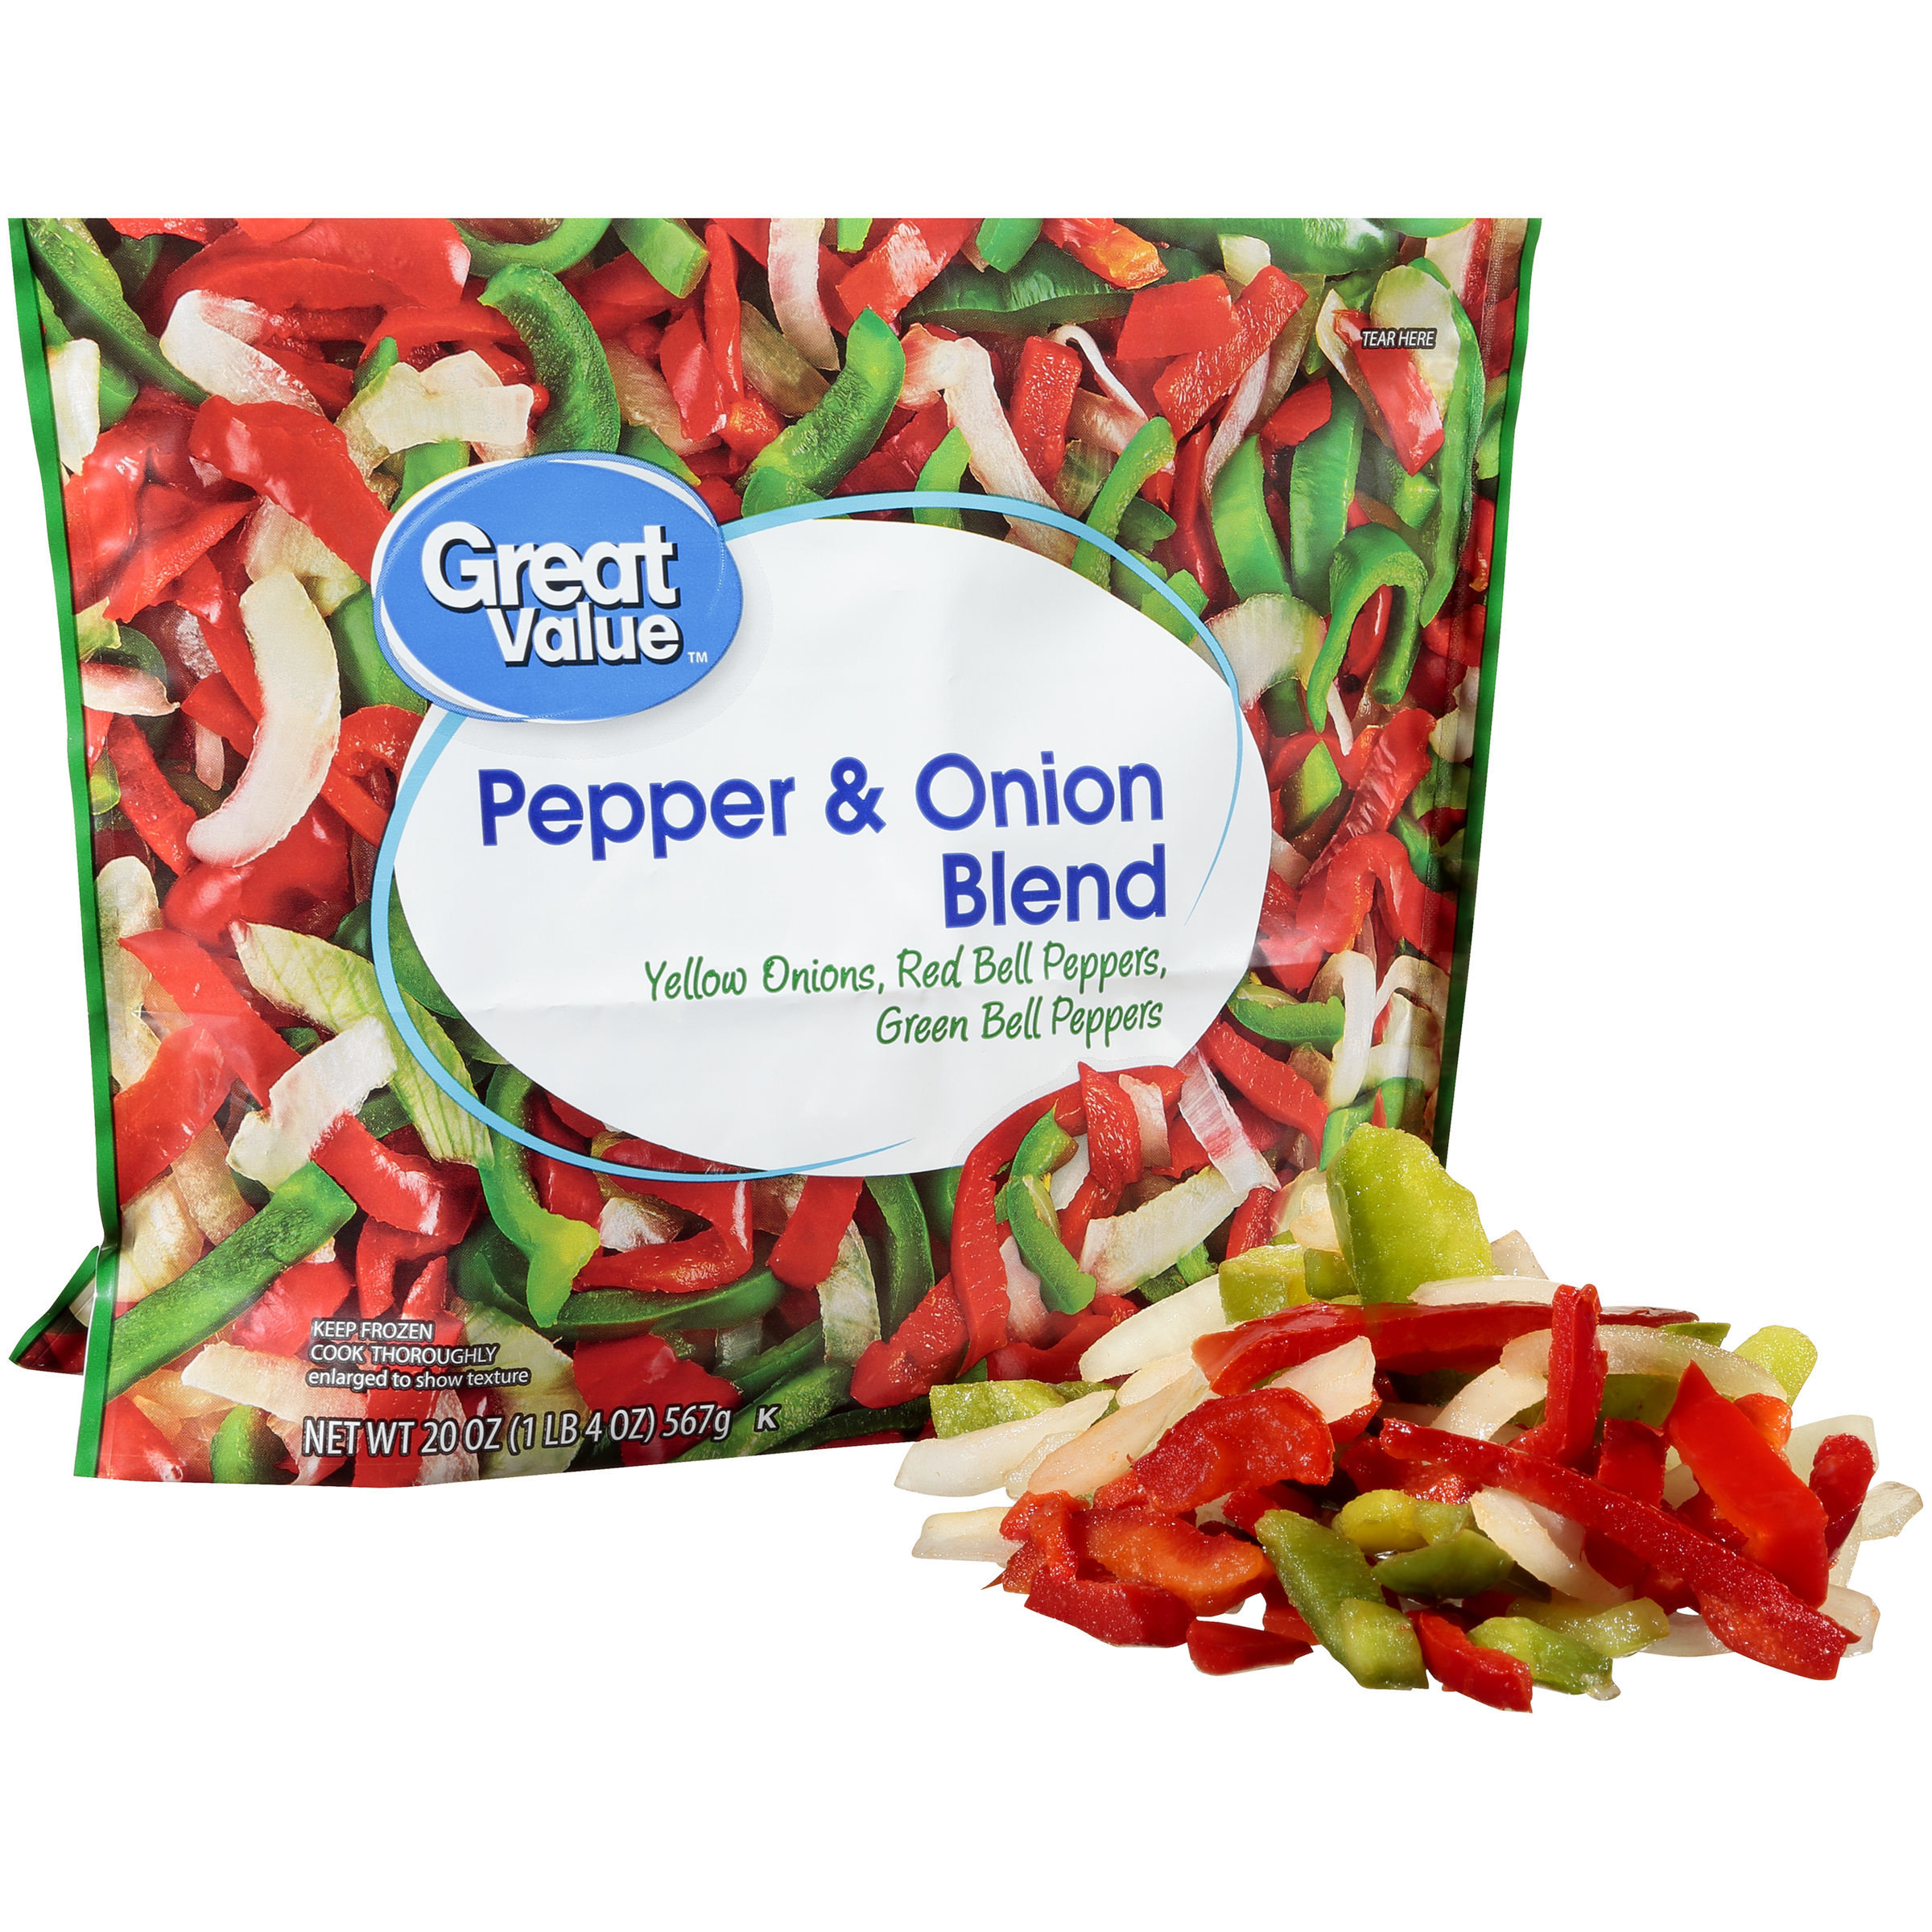 The bag of peppers with chopped-up peppers beside it